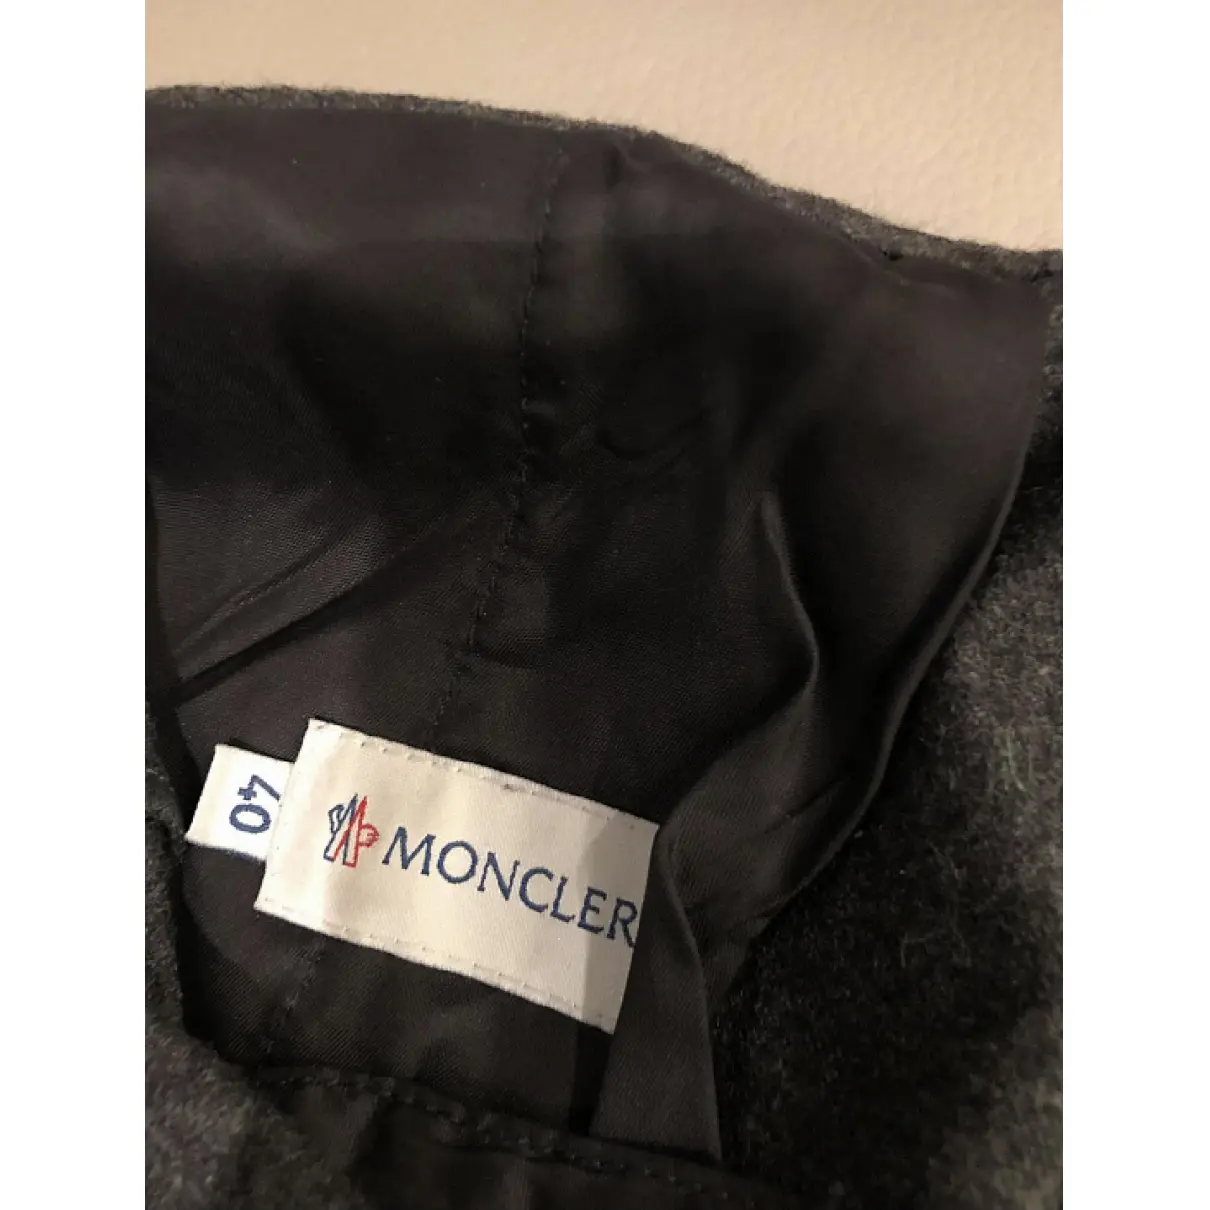 Buy Moncler Wool trousers online